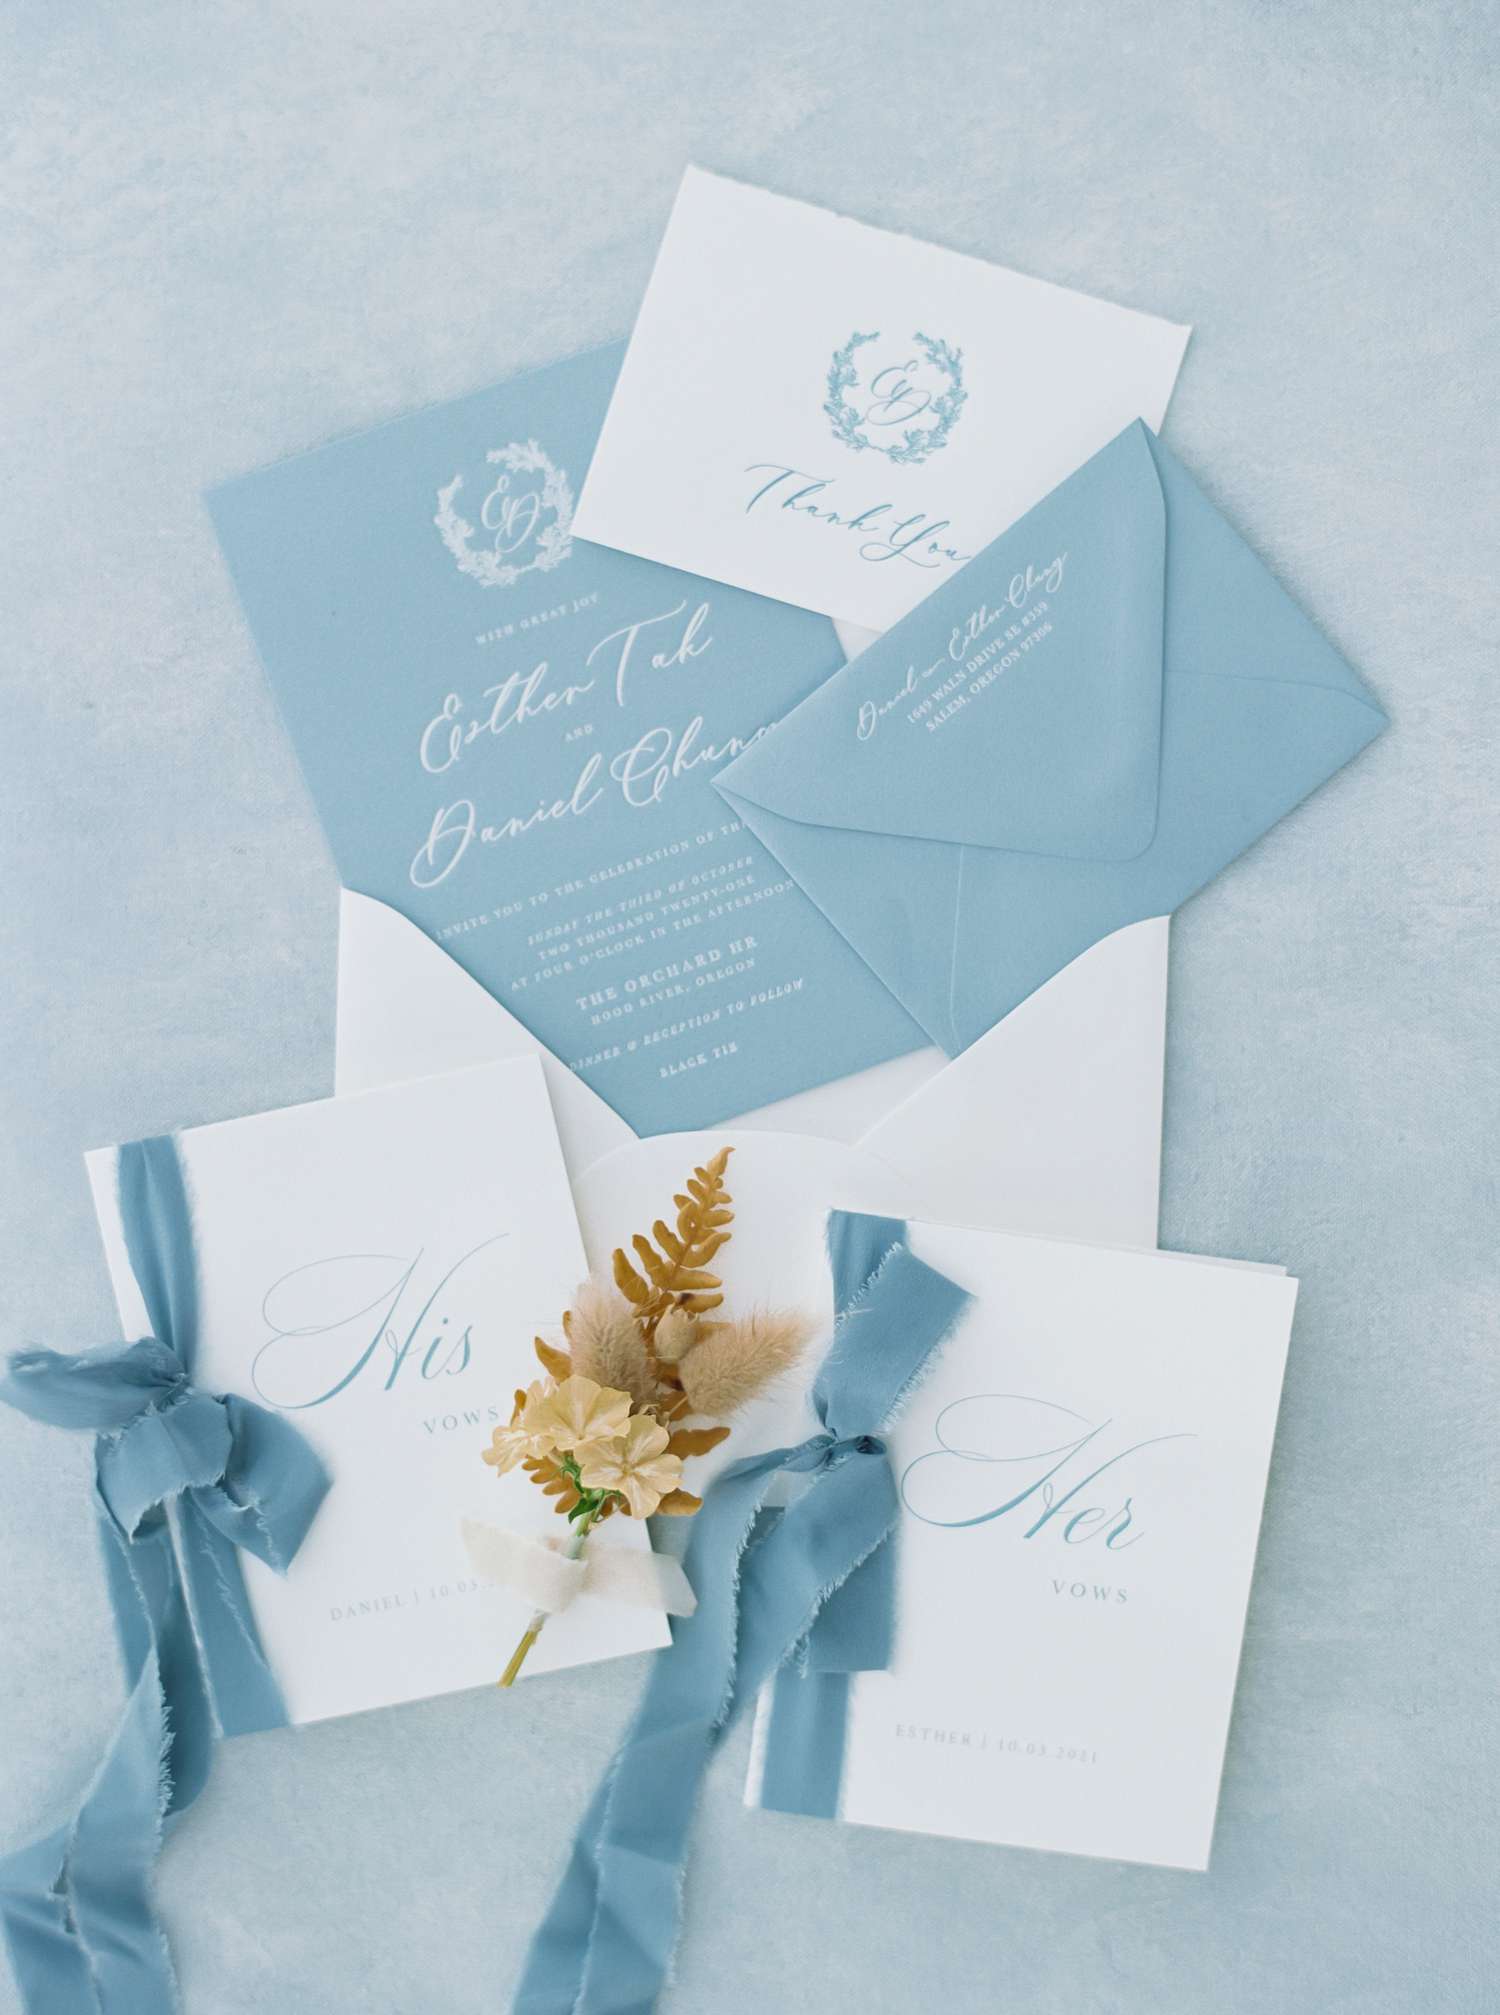 Esther and Daniel's blue and white invitations